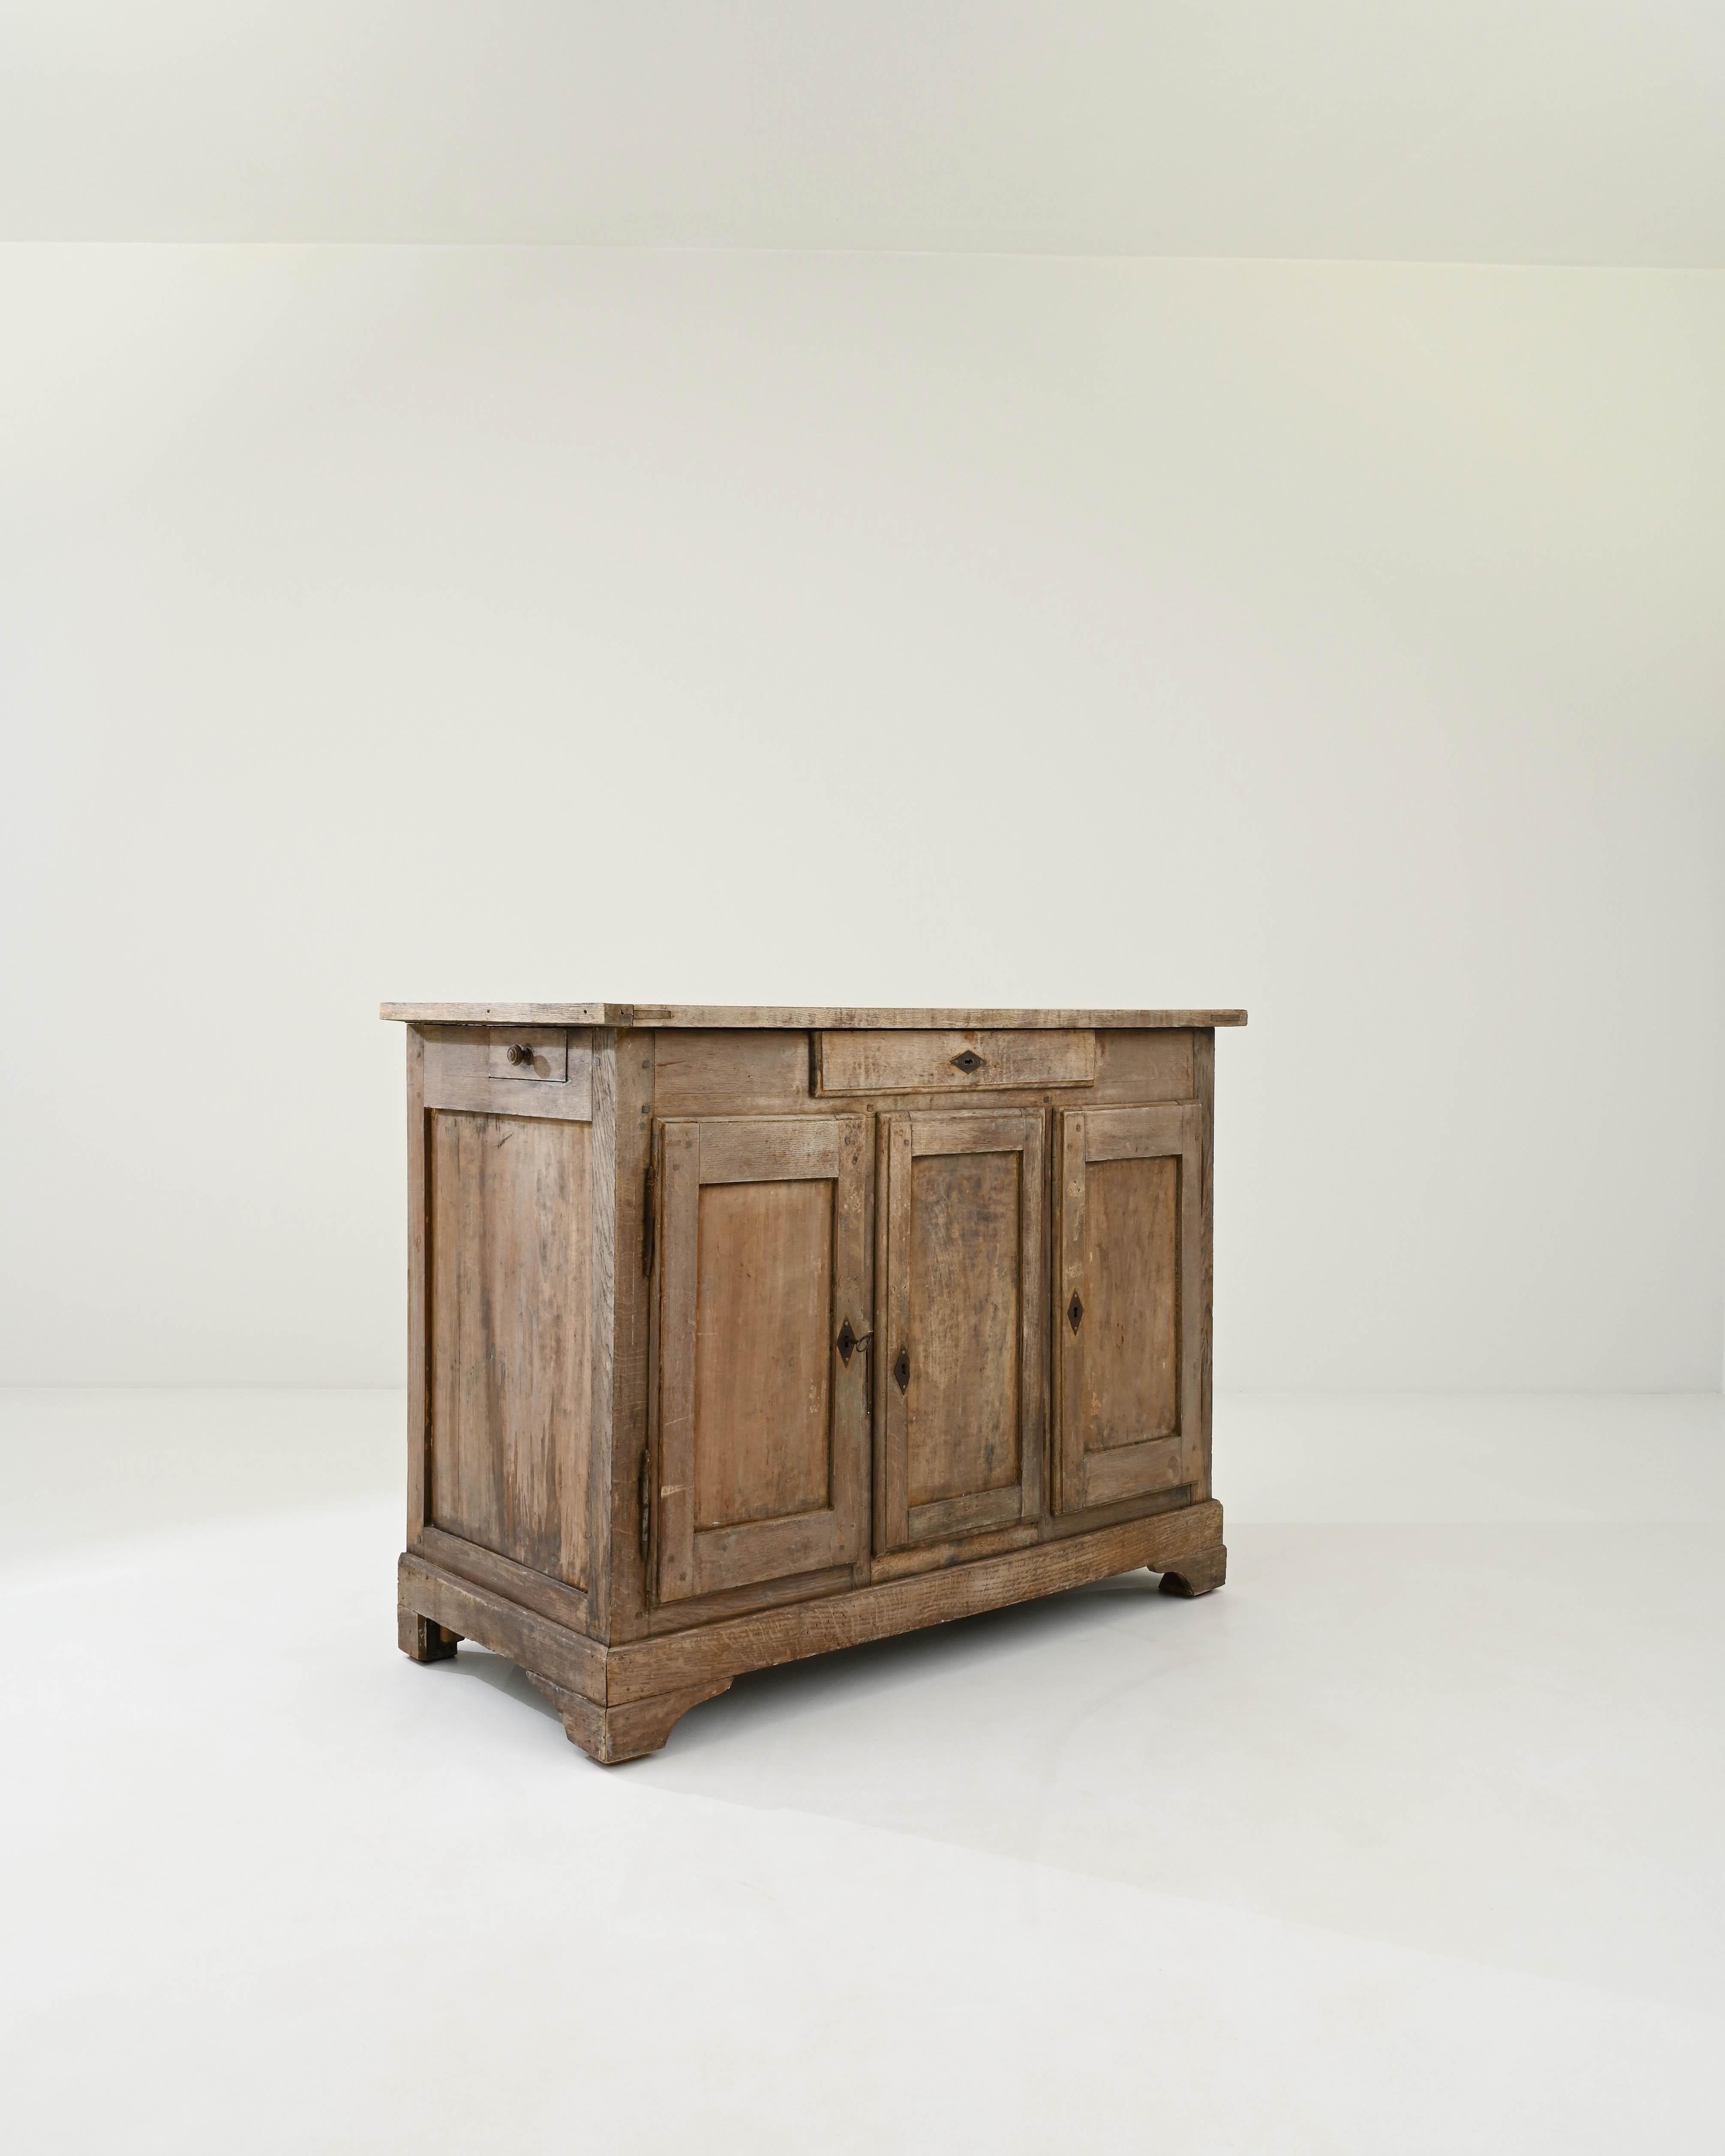 A quintessential Country French buffet cabinet, made circa 1800. The simple geometric shape recalls a countryside local and the time tested approach of regional French cabinet makers. Combining earthy colors and elevated craftsmanship, this buffet